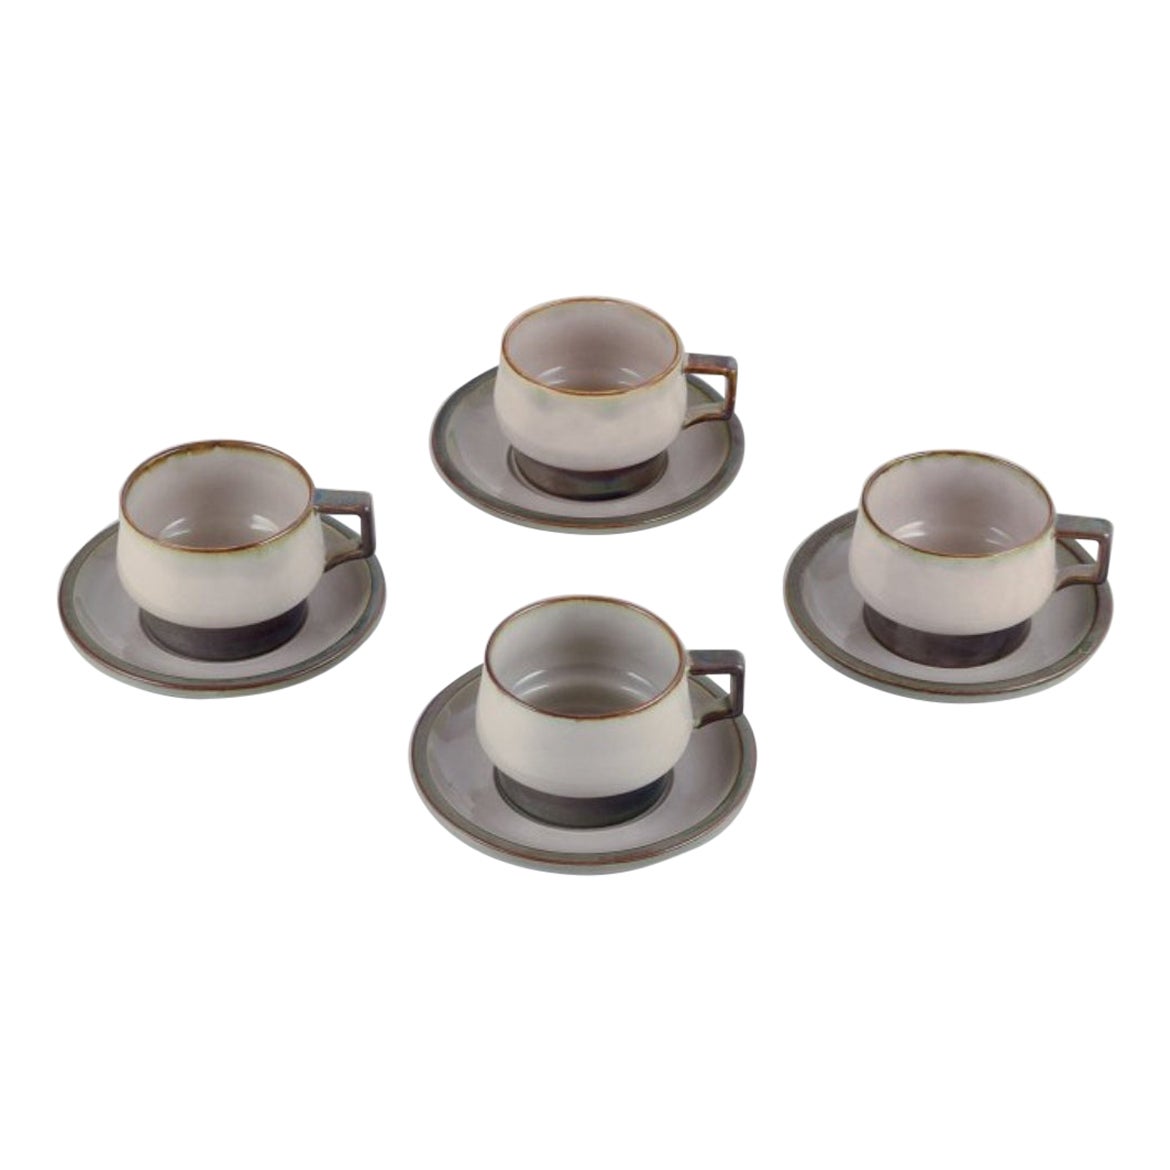 Bing & Grøndahl. Four sets of 'Tema' tea cups with saucers in stoneware. 